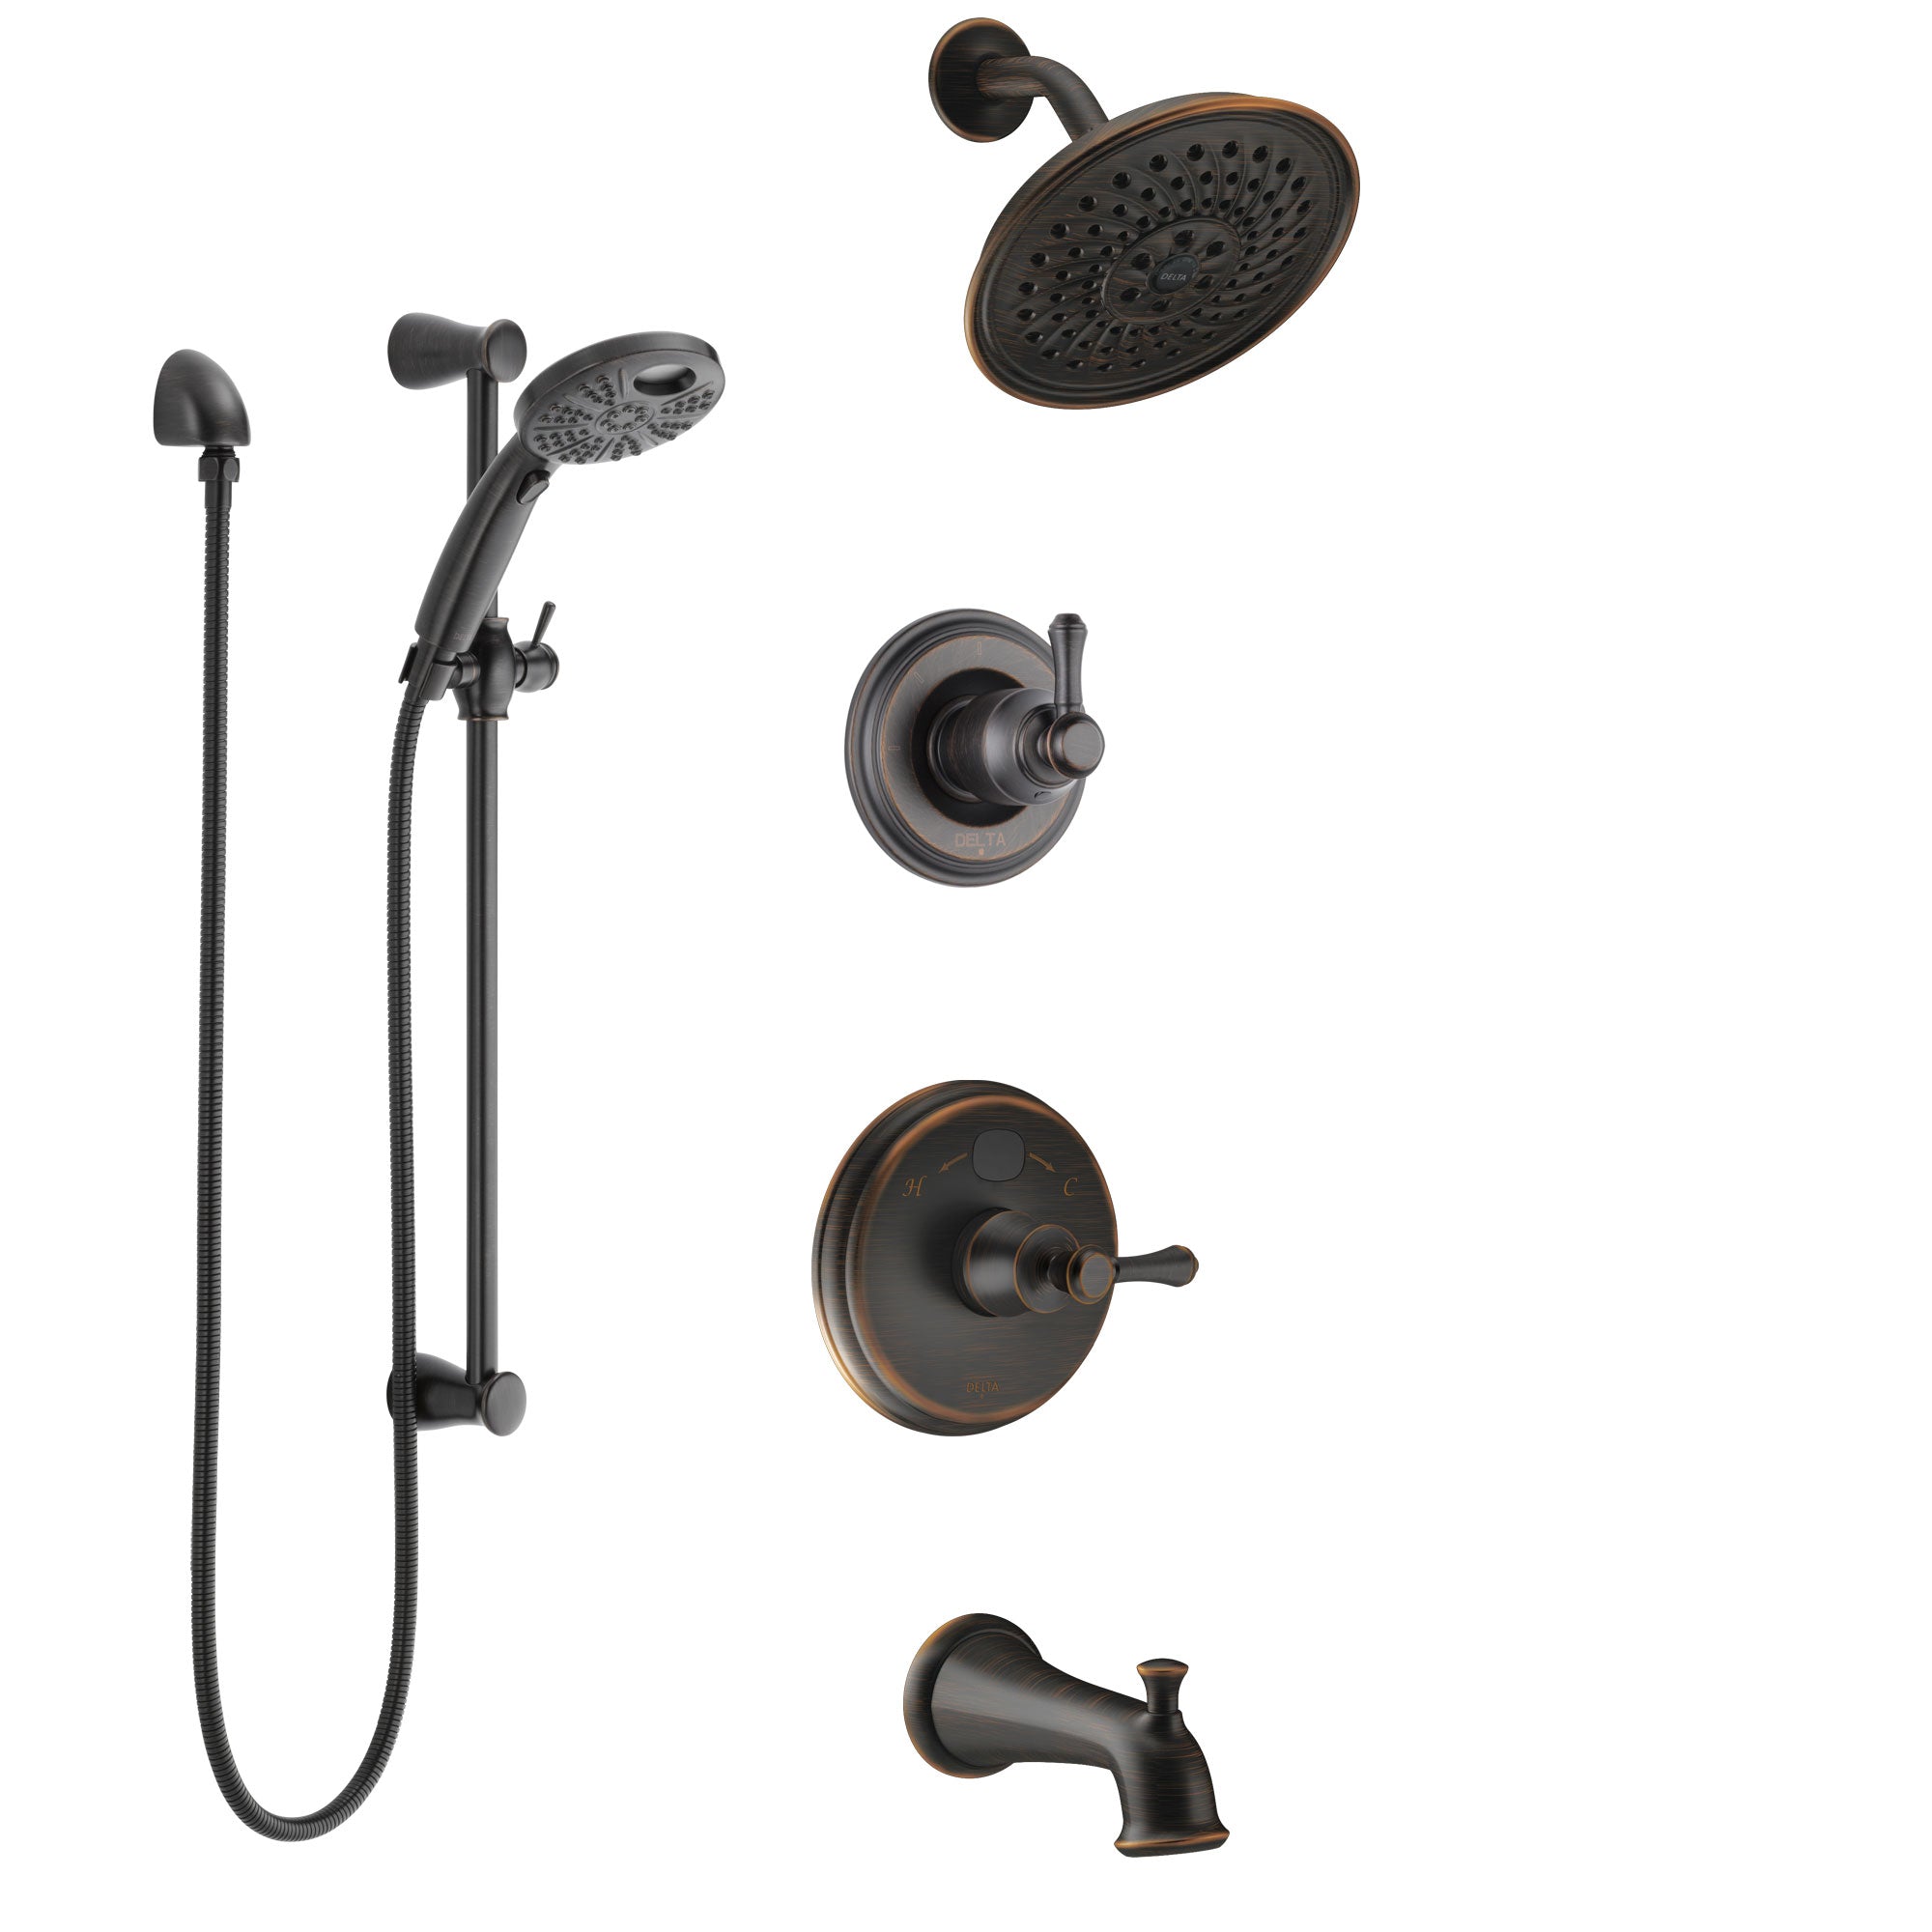 Delta Cassidy Venetian Bronze Tub and Shower System with Temp2O Control, 3-Setting Diverter, Showerhead, and Hand Shower with Slidebar SS14400RB4